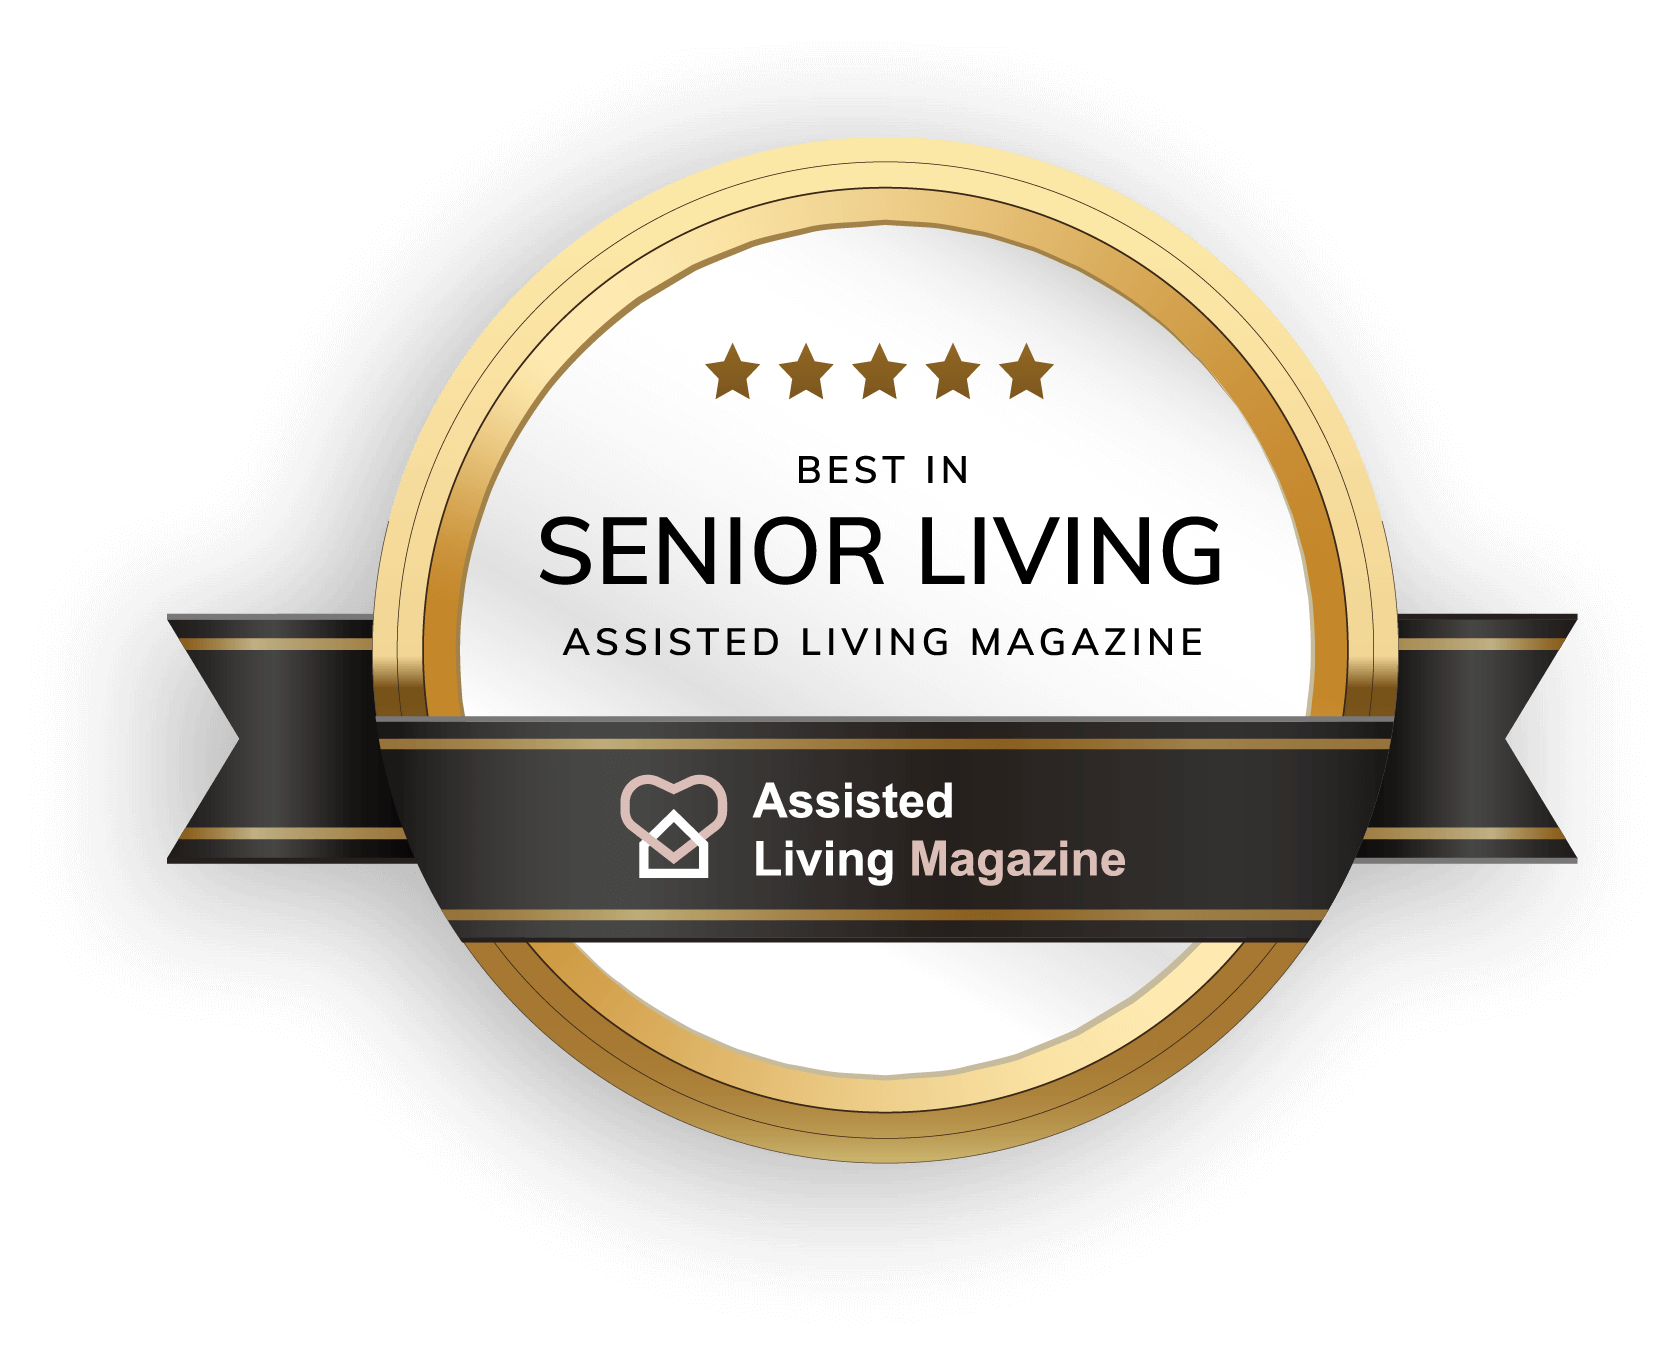 Carriage Crossing Senior Living's award emblem for 'Best in Senior Living' by Assisted Living Magazine with a 5-star rating